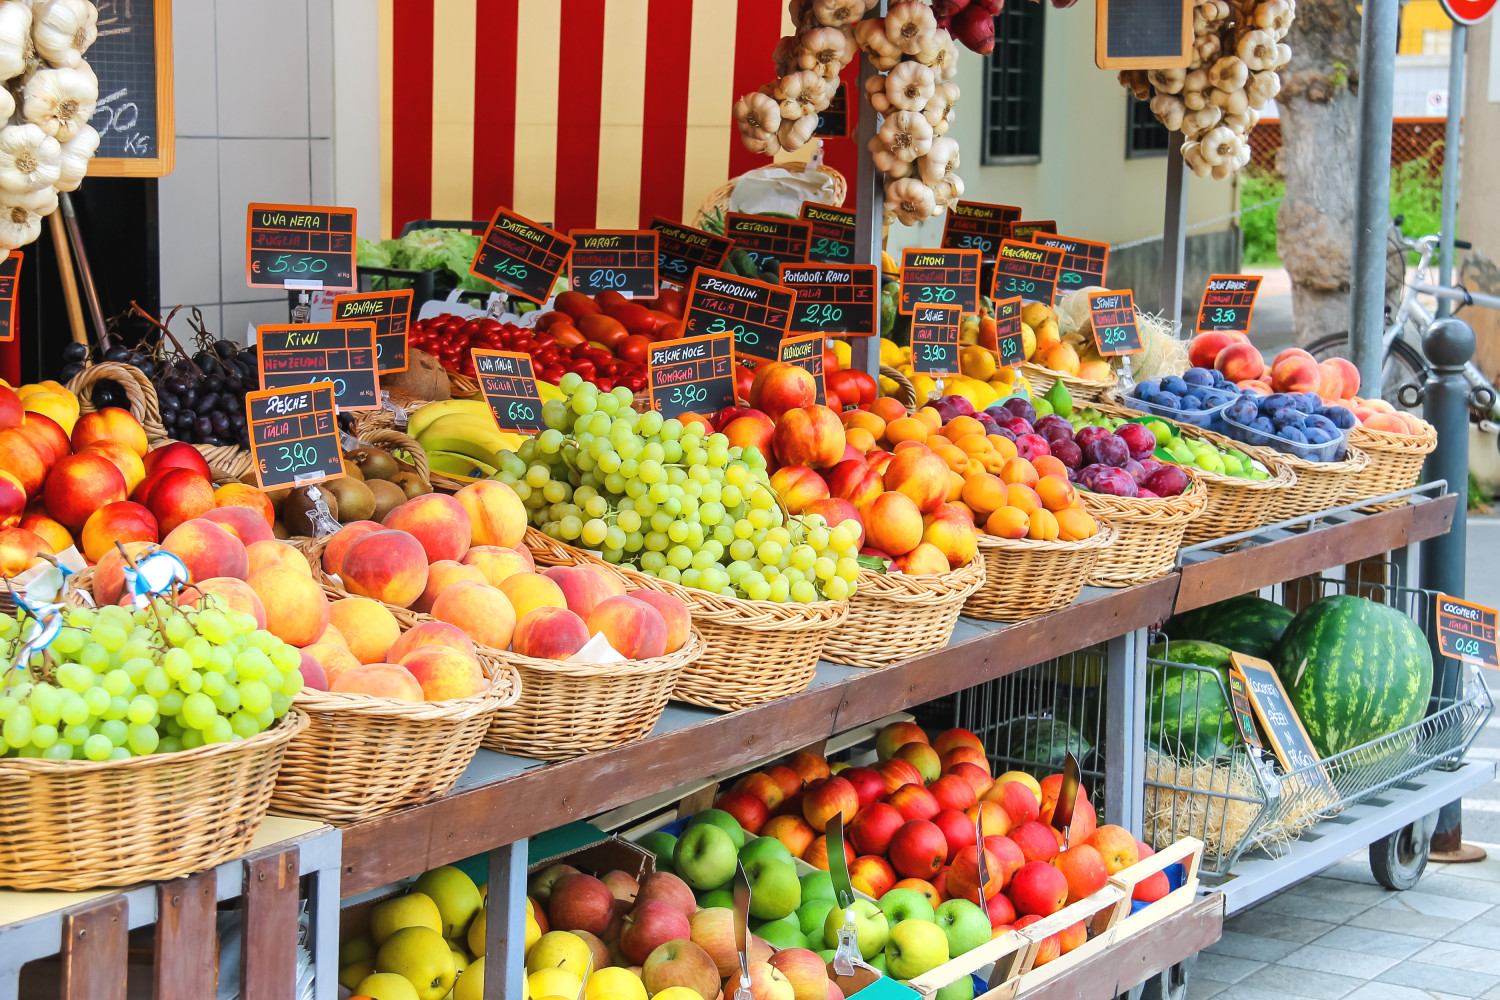 Italy Is Going To Require Grocery Stores To Donate Any Unsold Food To